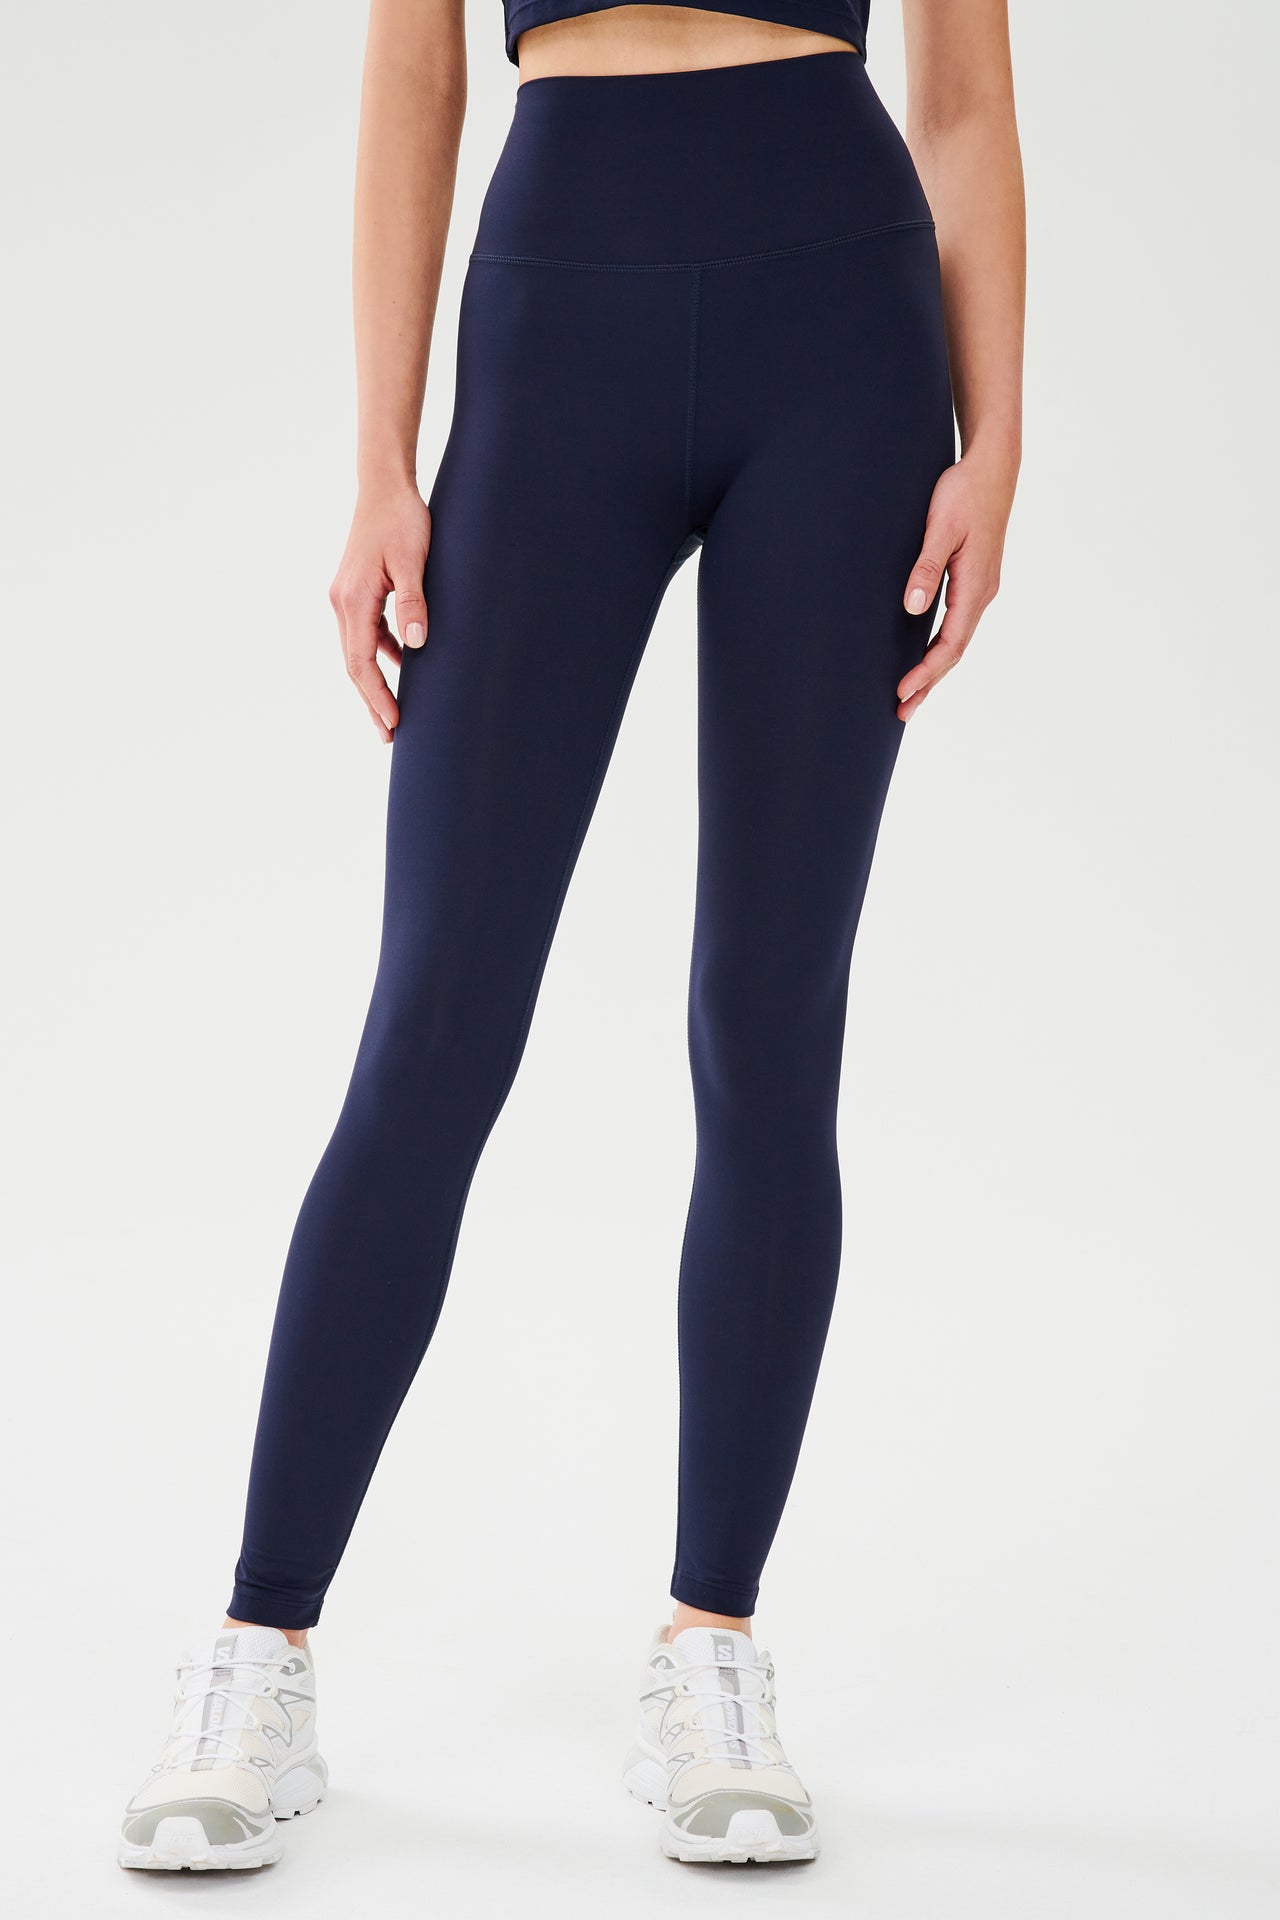 Front view of model wearing dark blue high waist  leggings  with white shoes 